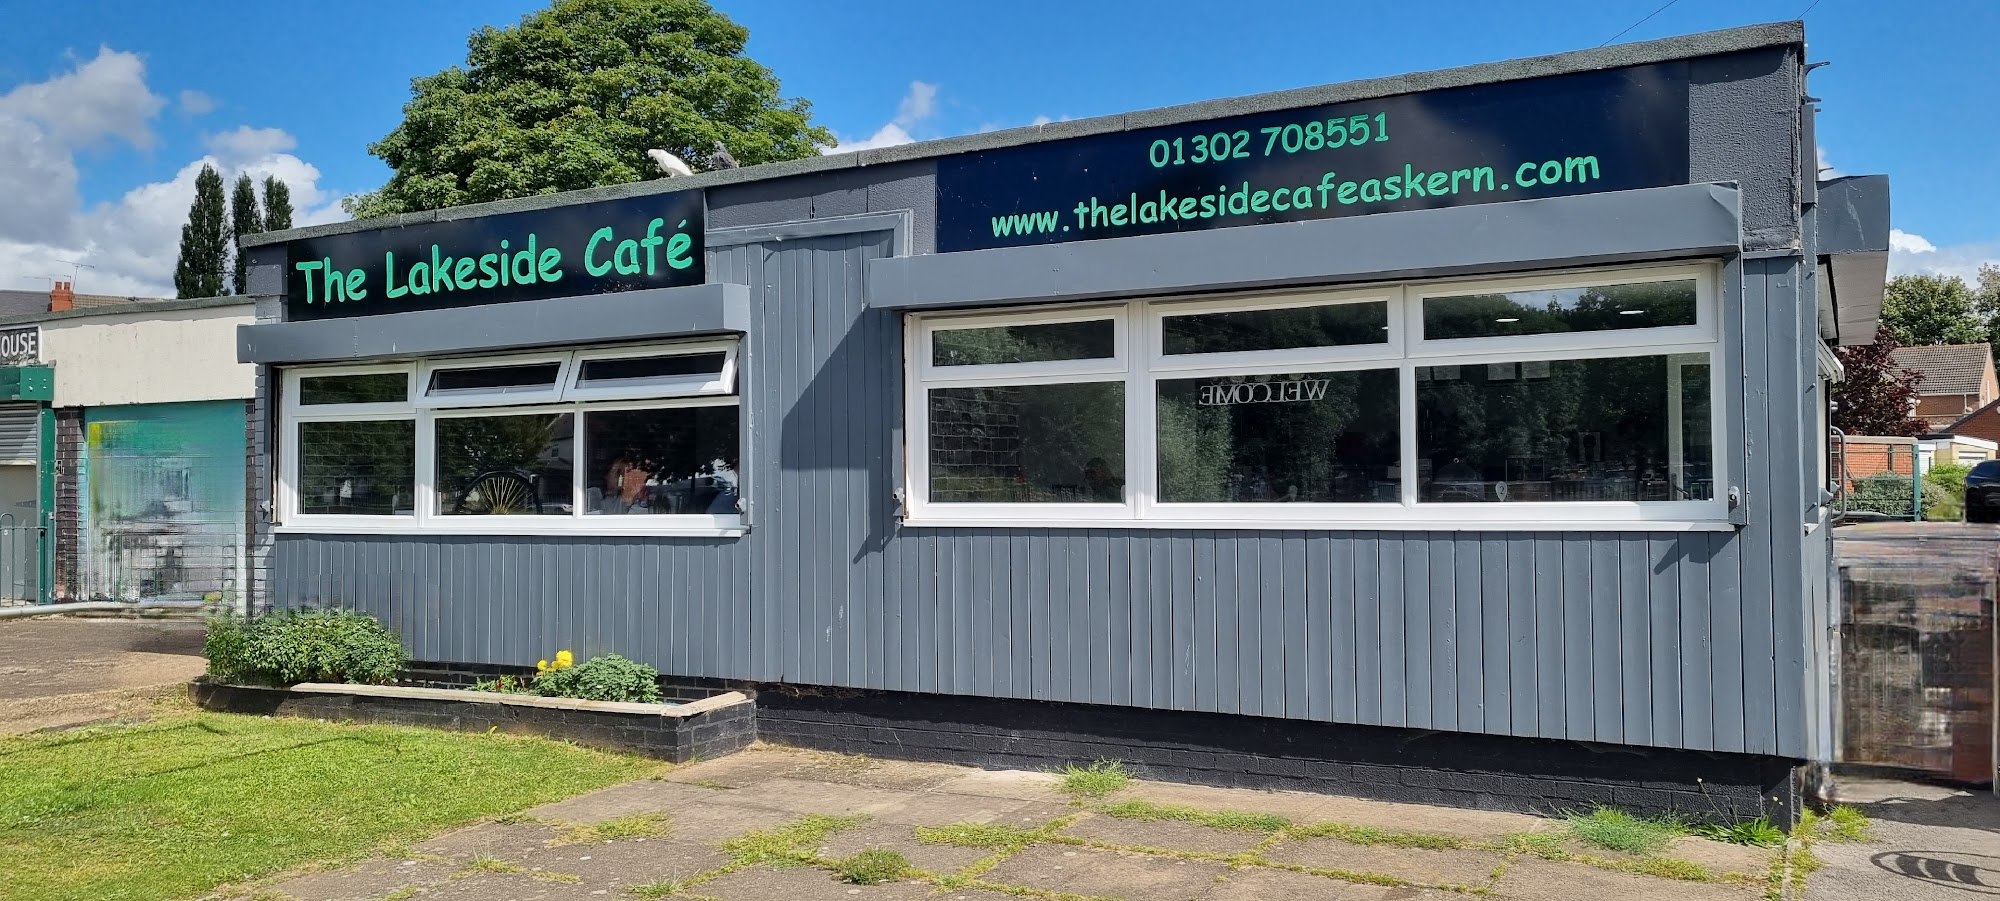 The Lakeside Cafe